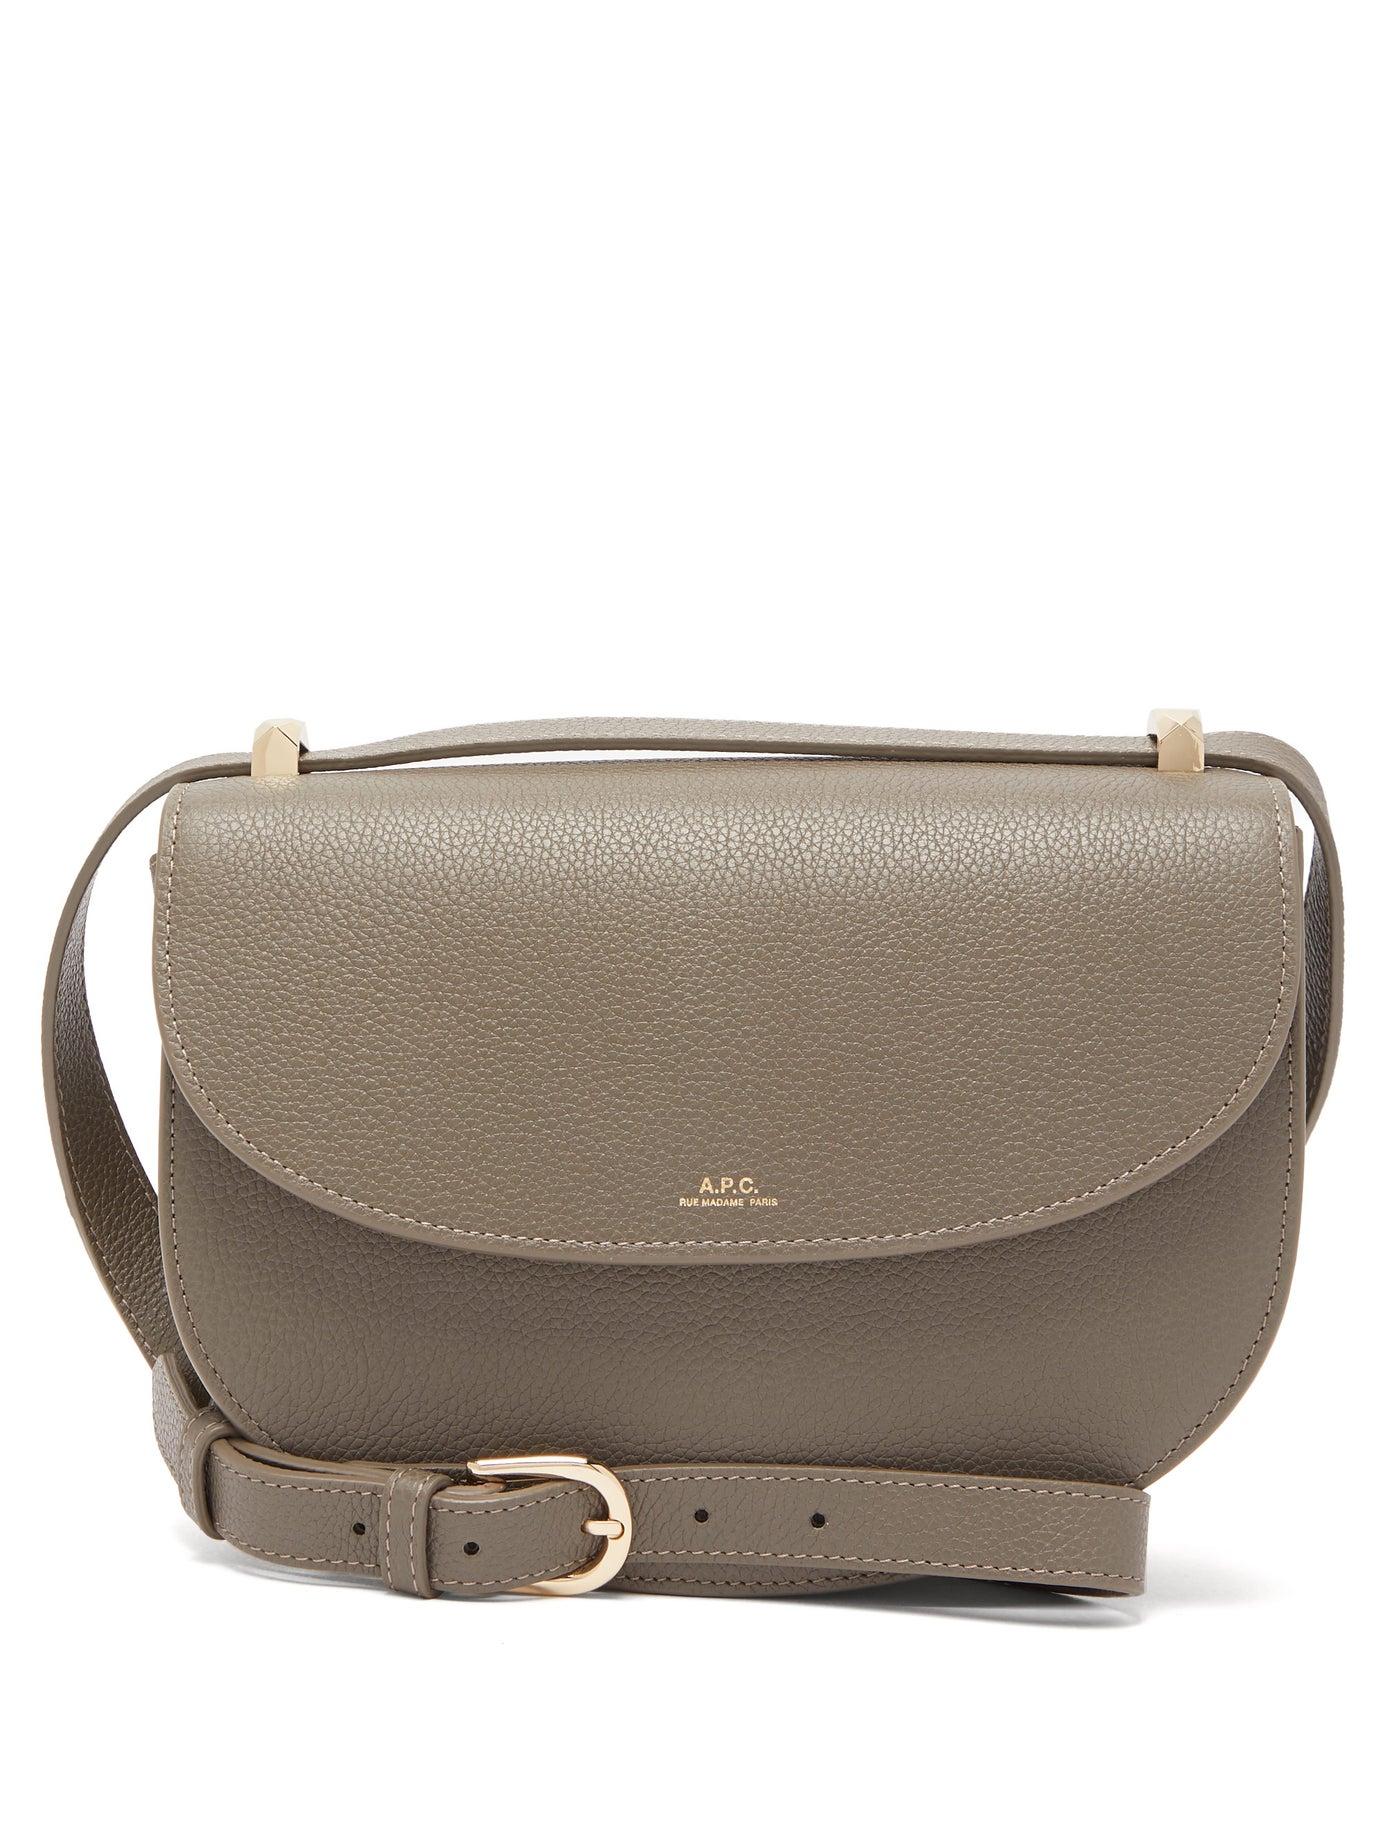 A.P.C. Geneve Grained-leather Cross-body Bag in Gray | Lyst